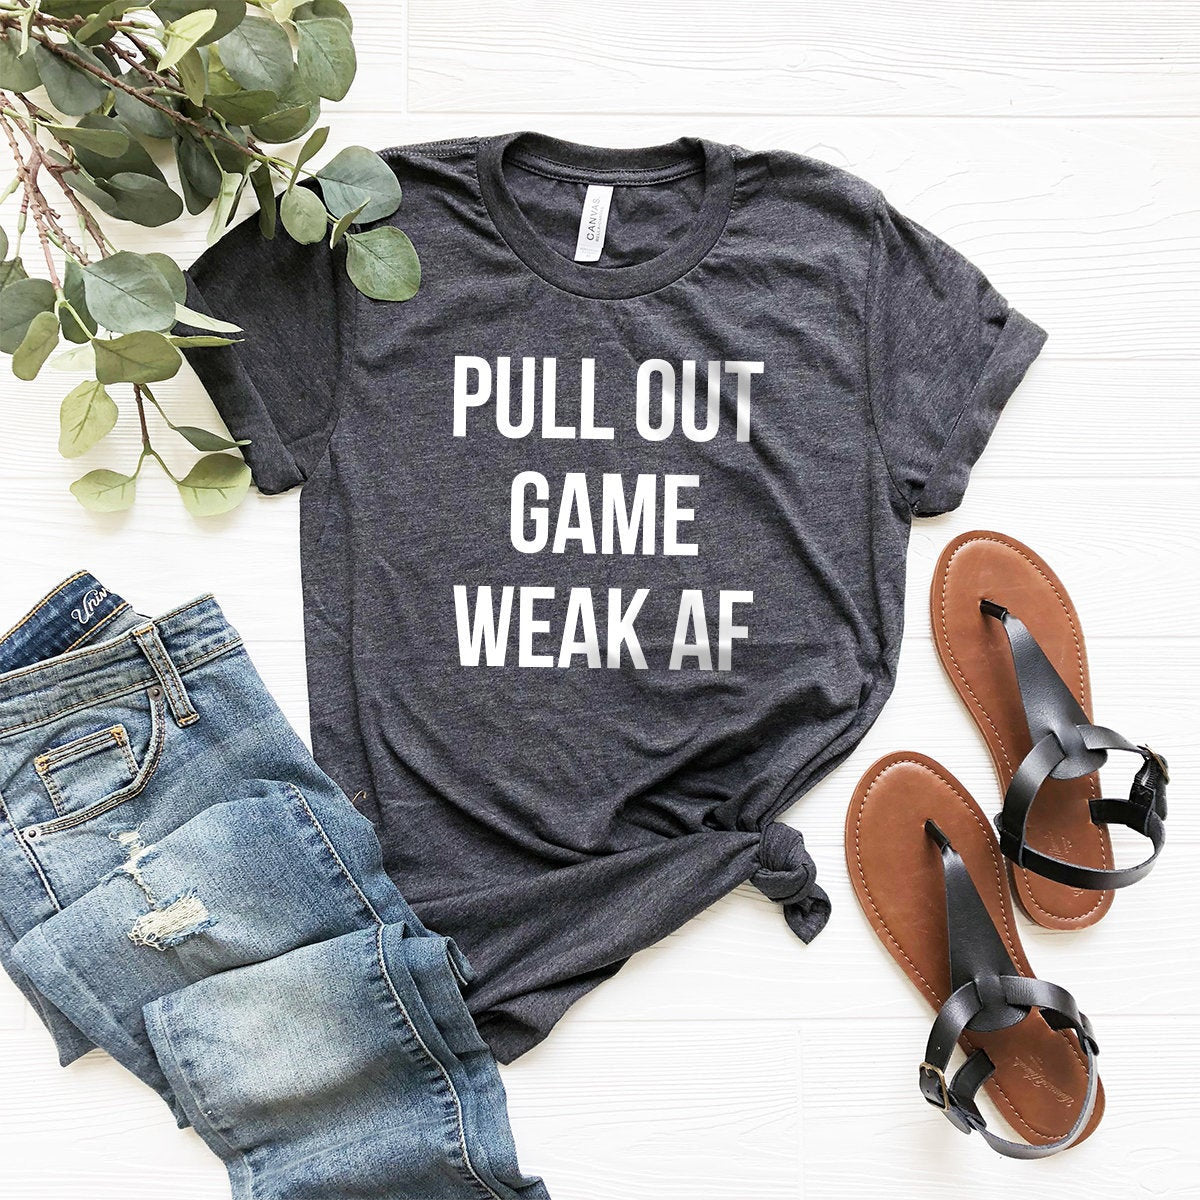 Funny Dad Shirt, Dadlife Shirt , Dad Gift, Pull Out Game Weak Af T Shirt, Fatherhood Shirt, Funny Daddy Shirt, Graphic Tee For Dad - Fastdeliverytees.com